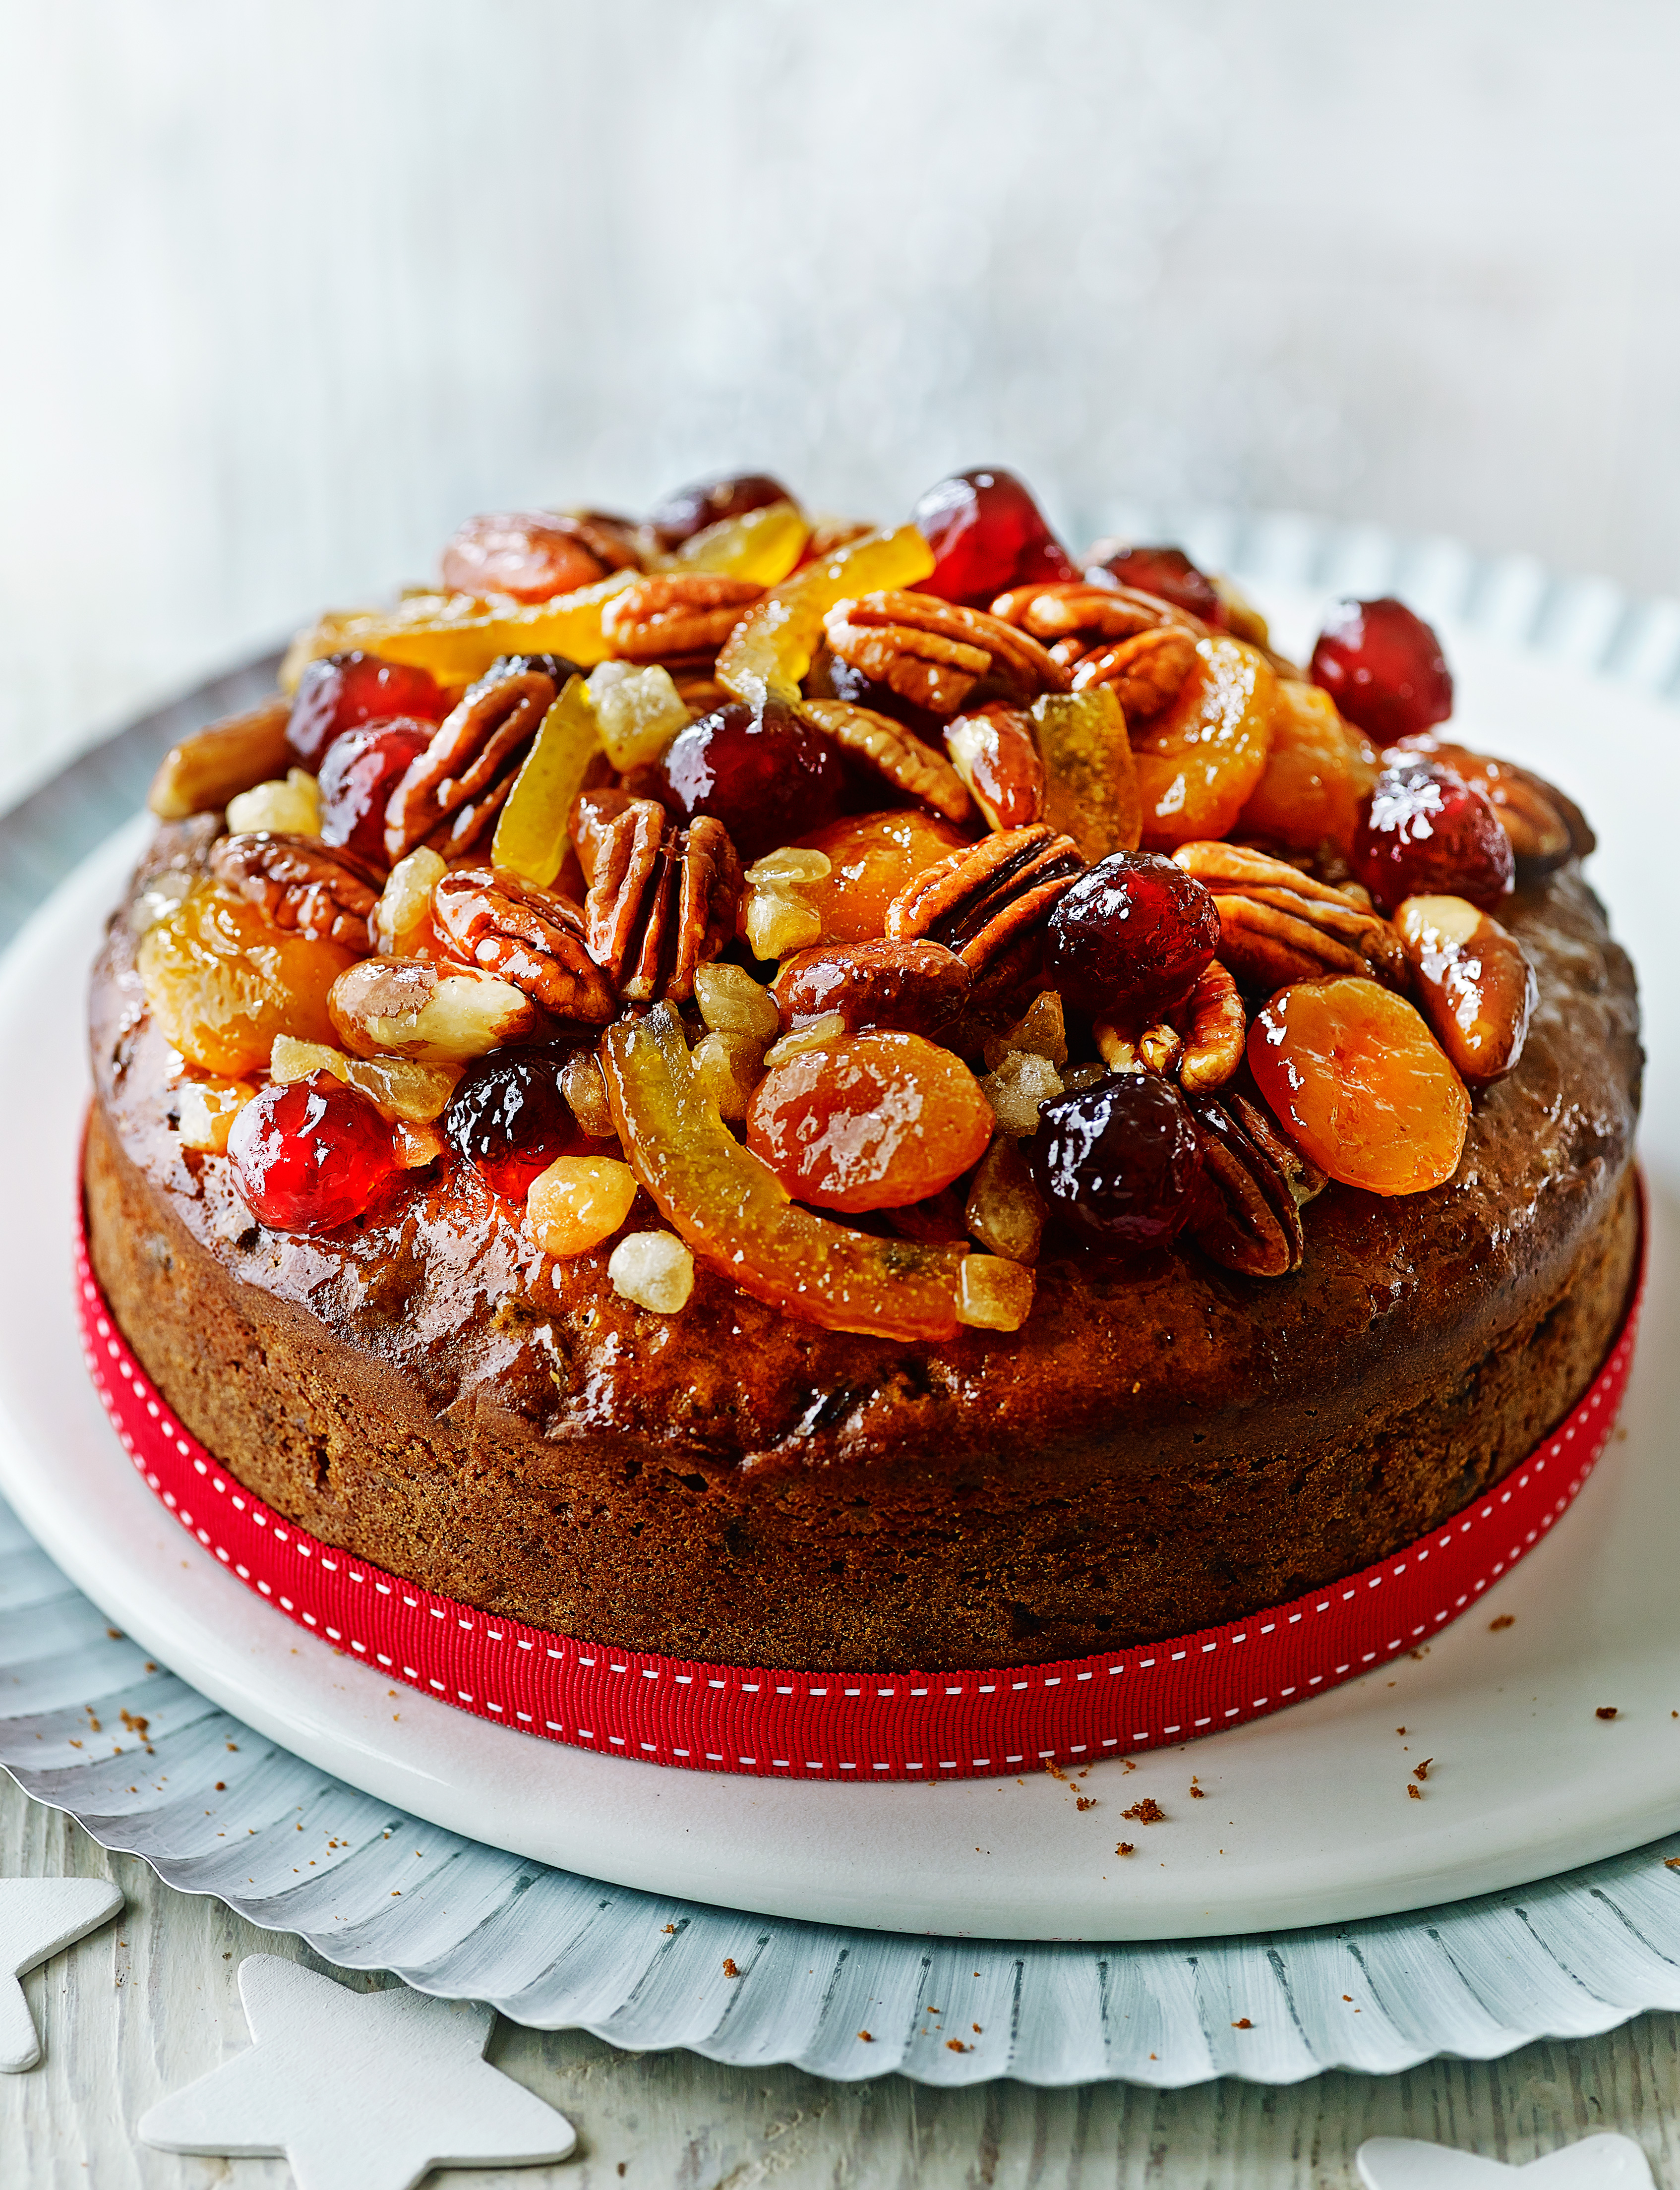 Healthy And Gluten-Free Christmas Fruit Cake Recipe | TheHealthSite.com